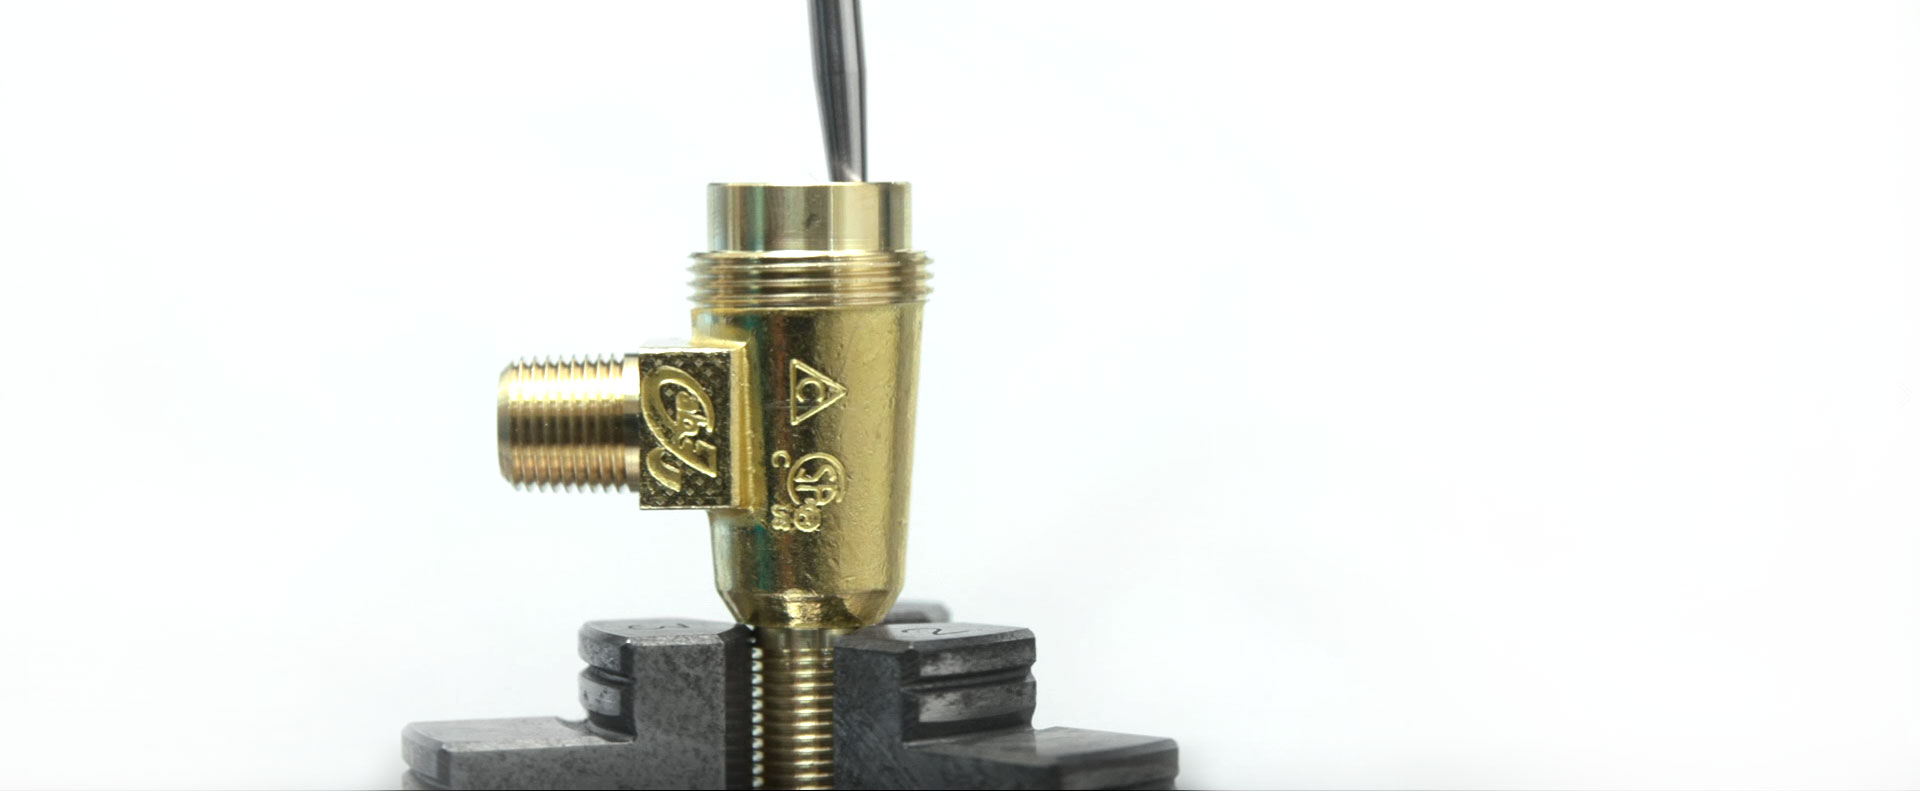 Alpha Brass Controls offers complete customer support with full ODM/OBM